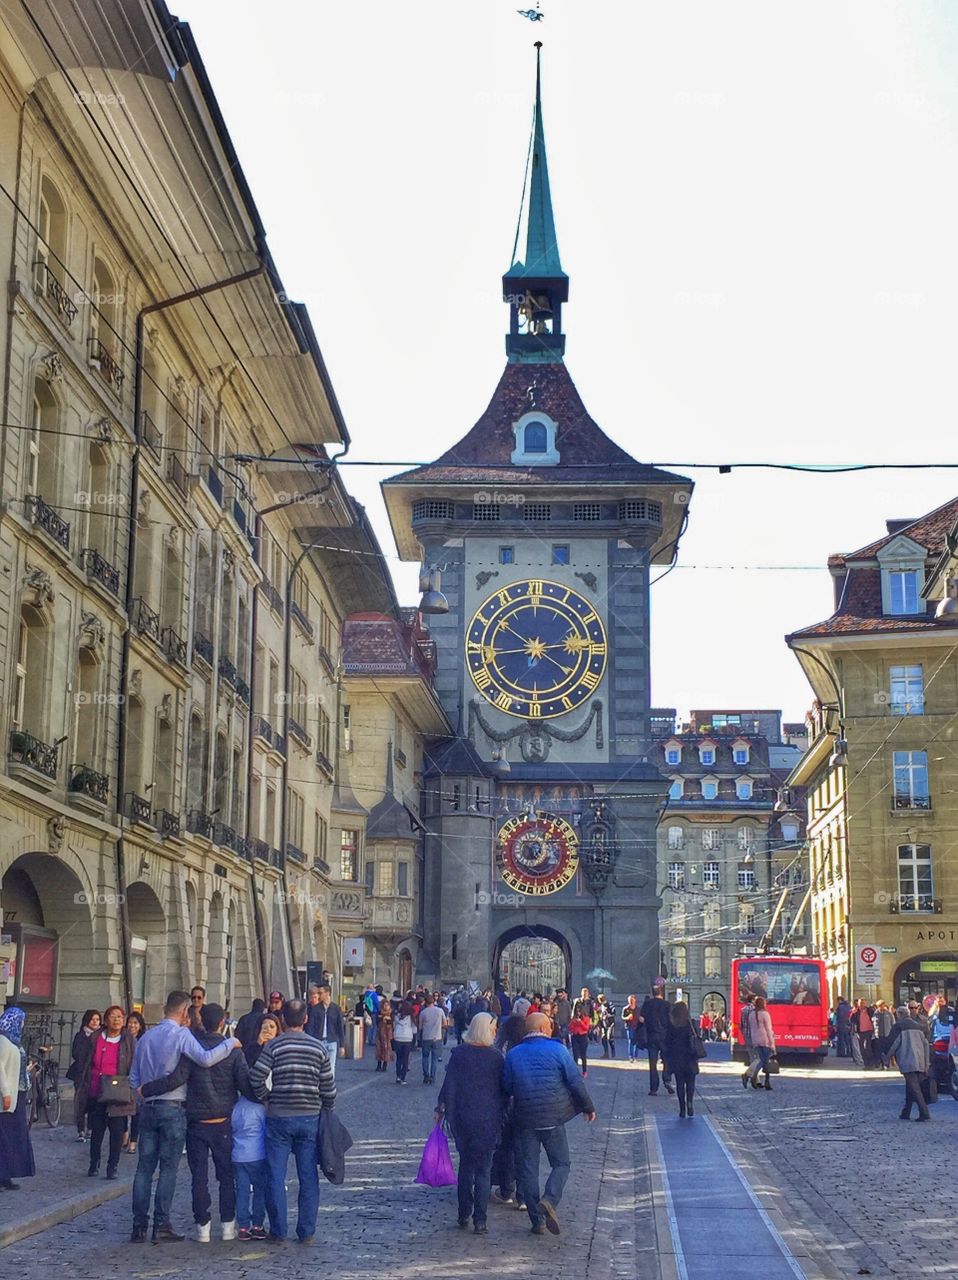 Clock Tower, Old Town, Berne